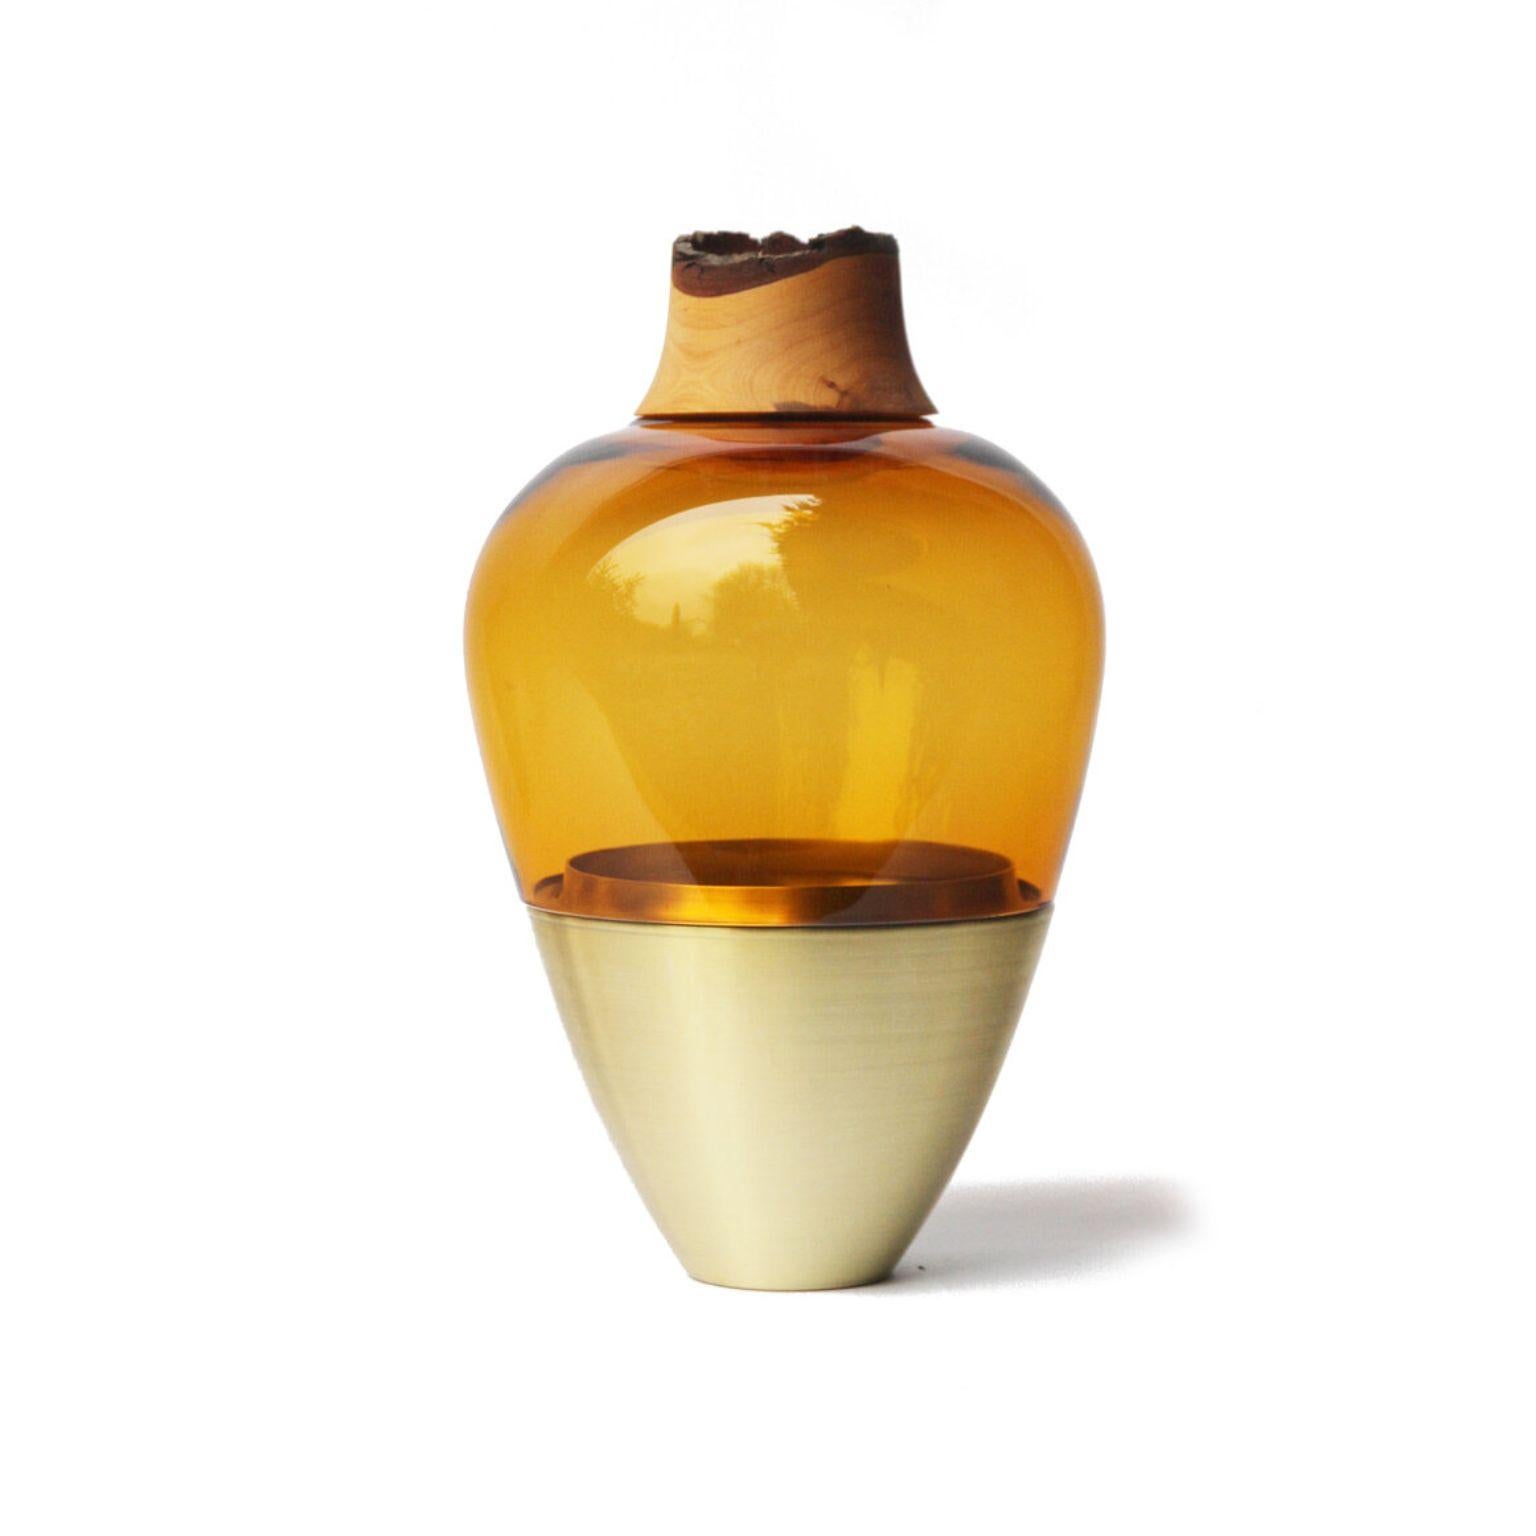 Amber and brass sculpted blown glass, Pia Wüstenberg
Dimensions: Height 20 x diameter 38cm
Materials: Hand blown glass, brass

Pia Wüstenberg, Utopia
Pia Wüstenberg is a creative with a passion for materials and craft. She graduated from the